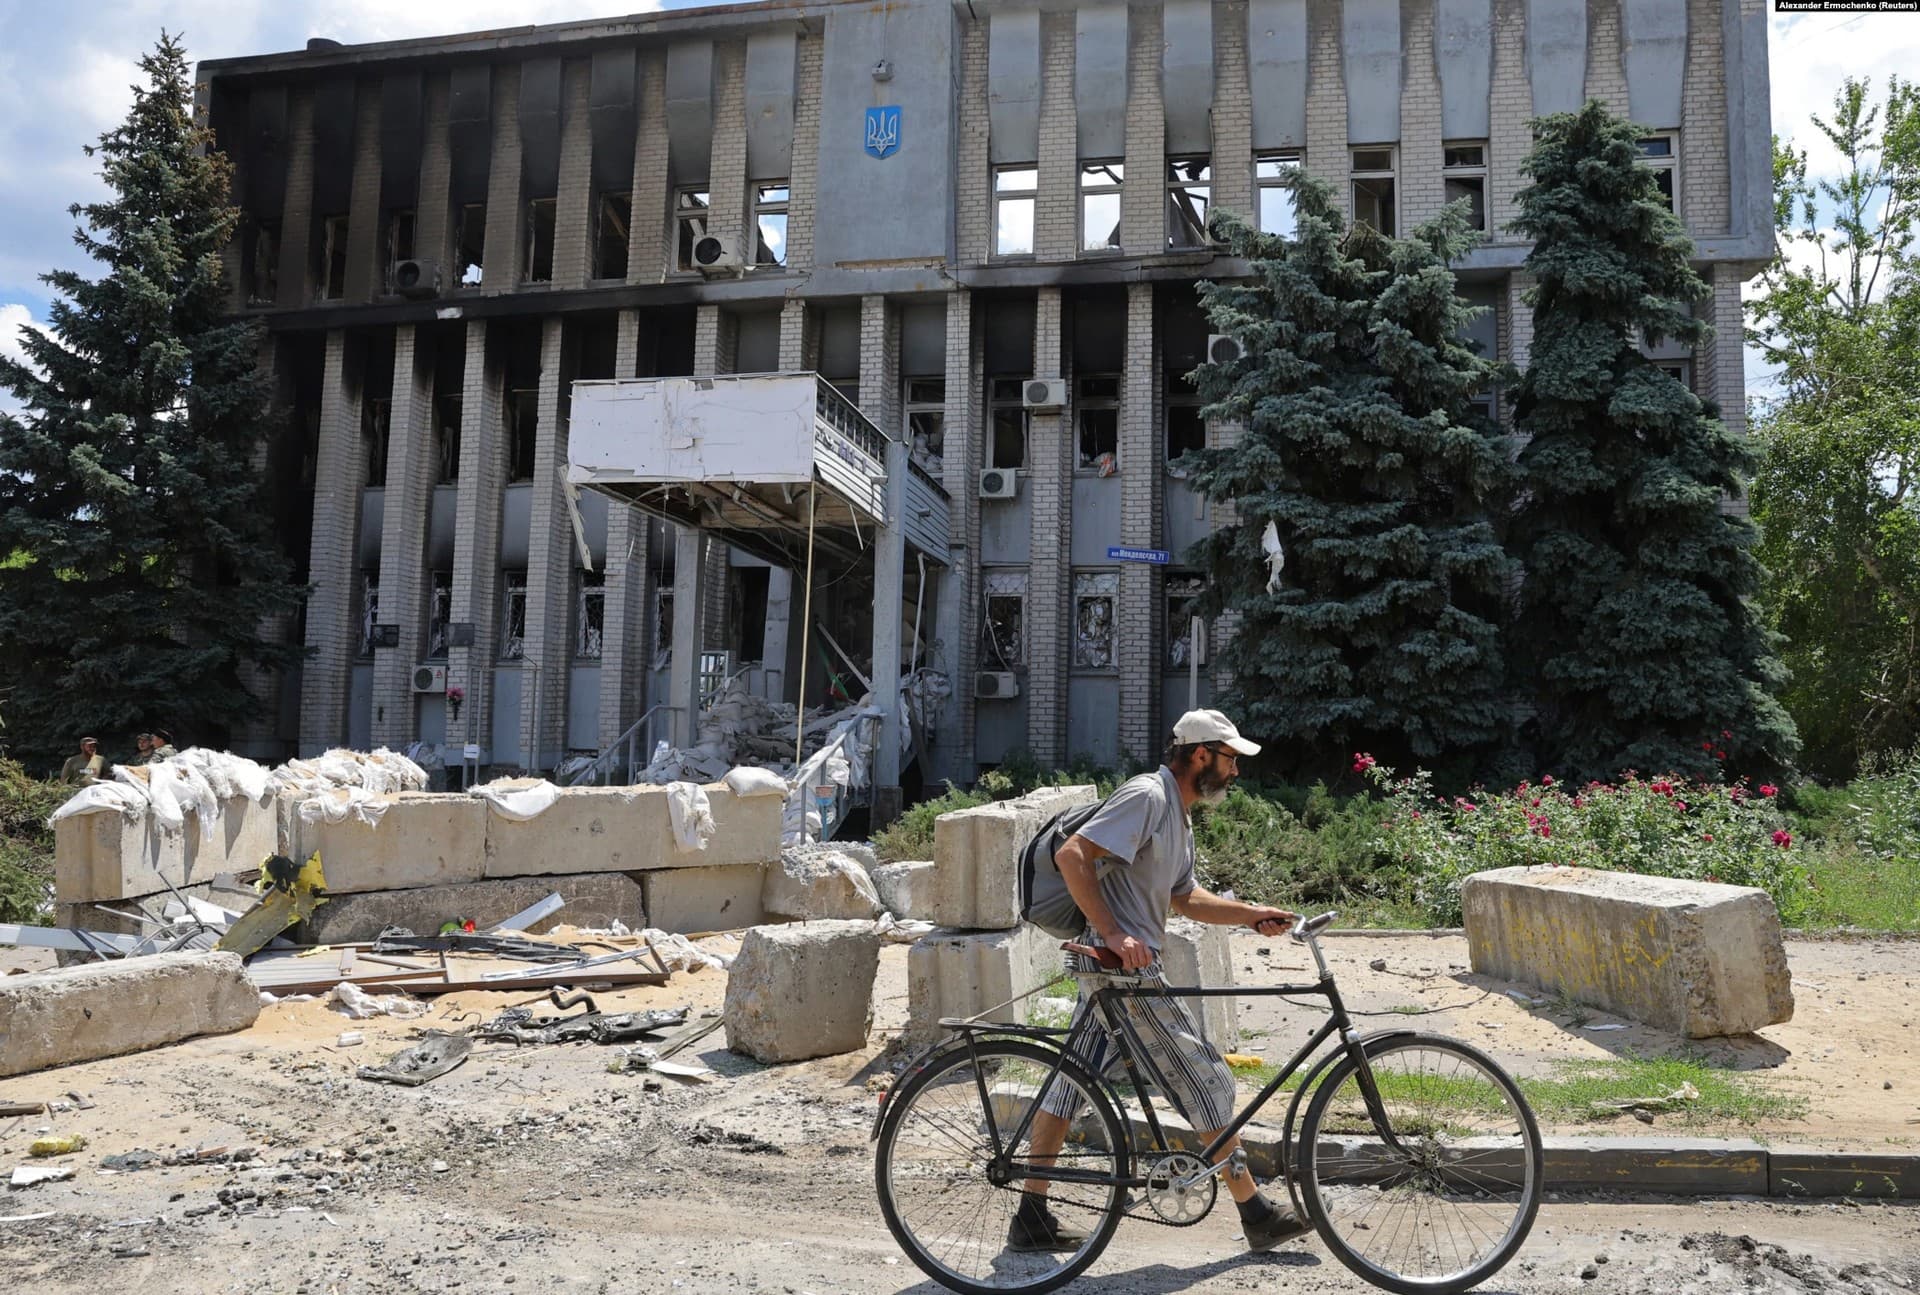 A local resident walks with a bicycle past a destroyed police department building